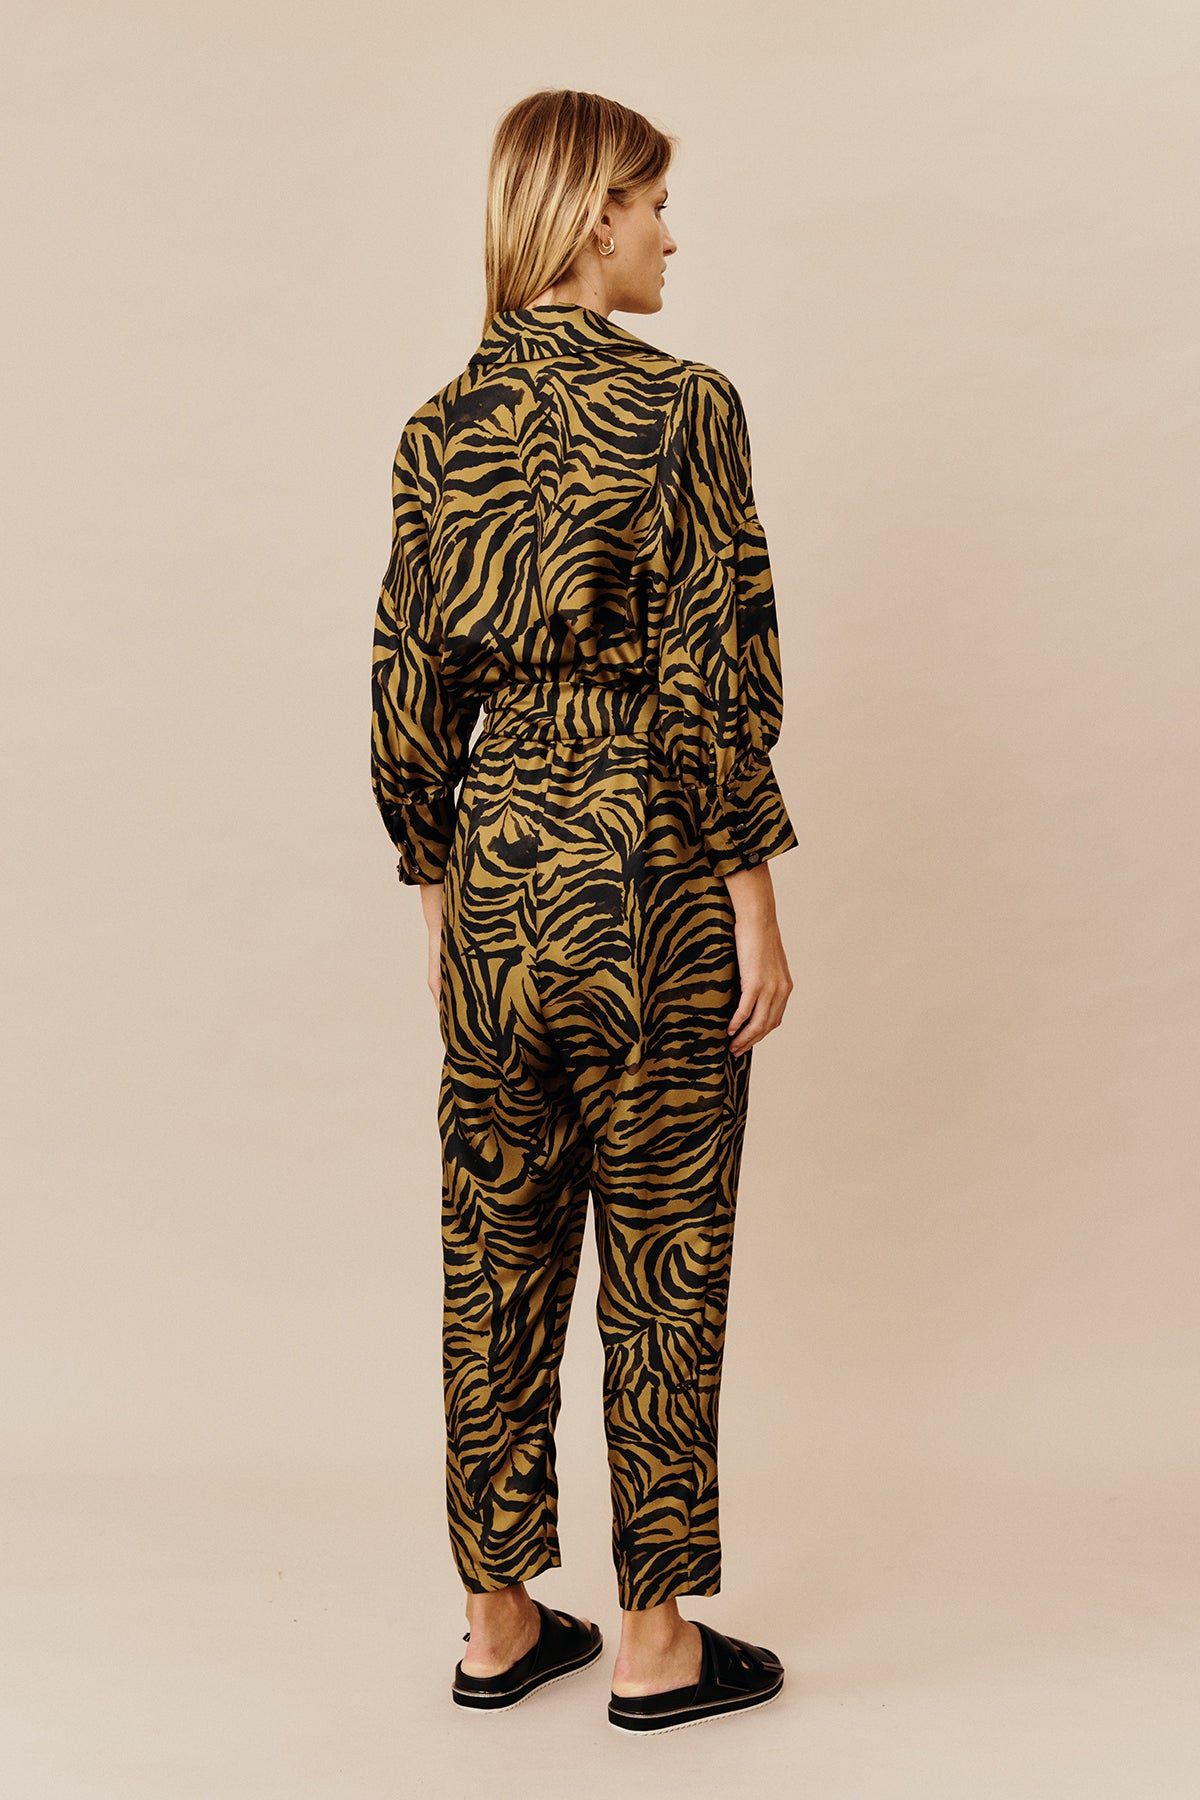 Back view of model wearing Australian women’s fashion designer GINGER & SMARTS’ Feline Jumpsuit, crafted from a silk twill in olive green and gold animal print with a tapered leg silhouette, shirt collar, button through front, half sleeve and elasticised waist with tie. 